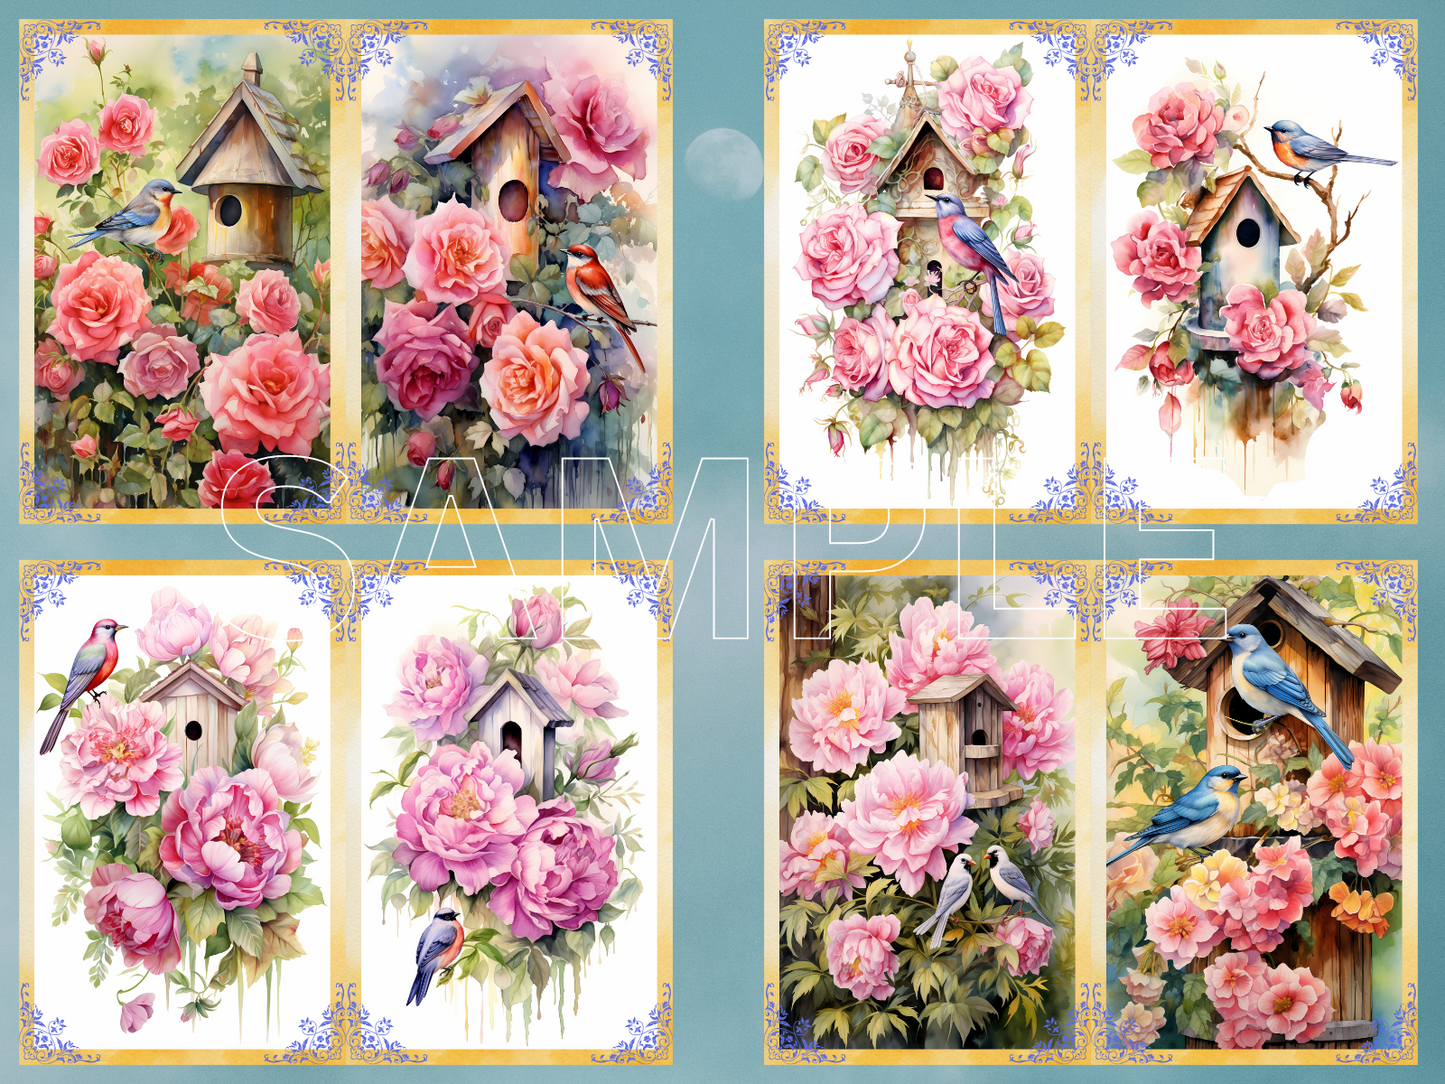 Bird Houses -Junk Journal Pages, Craft Supplies, Scrapbooking, Printable Journal Pages